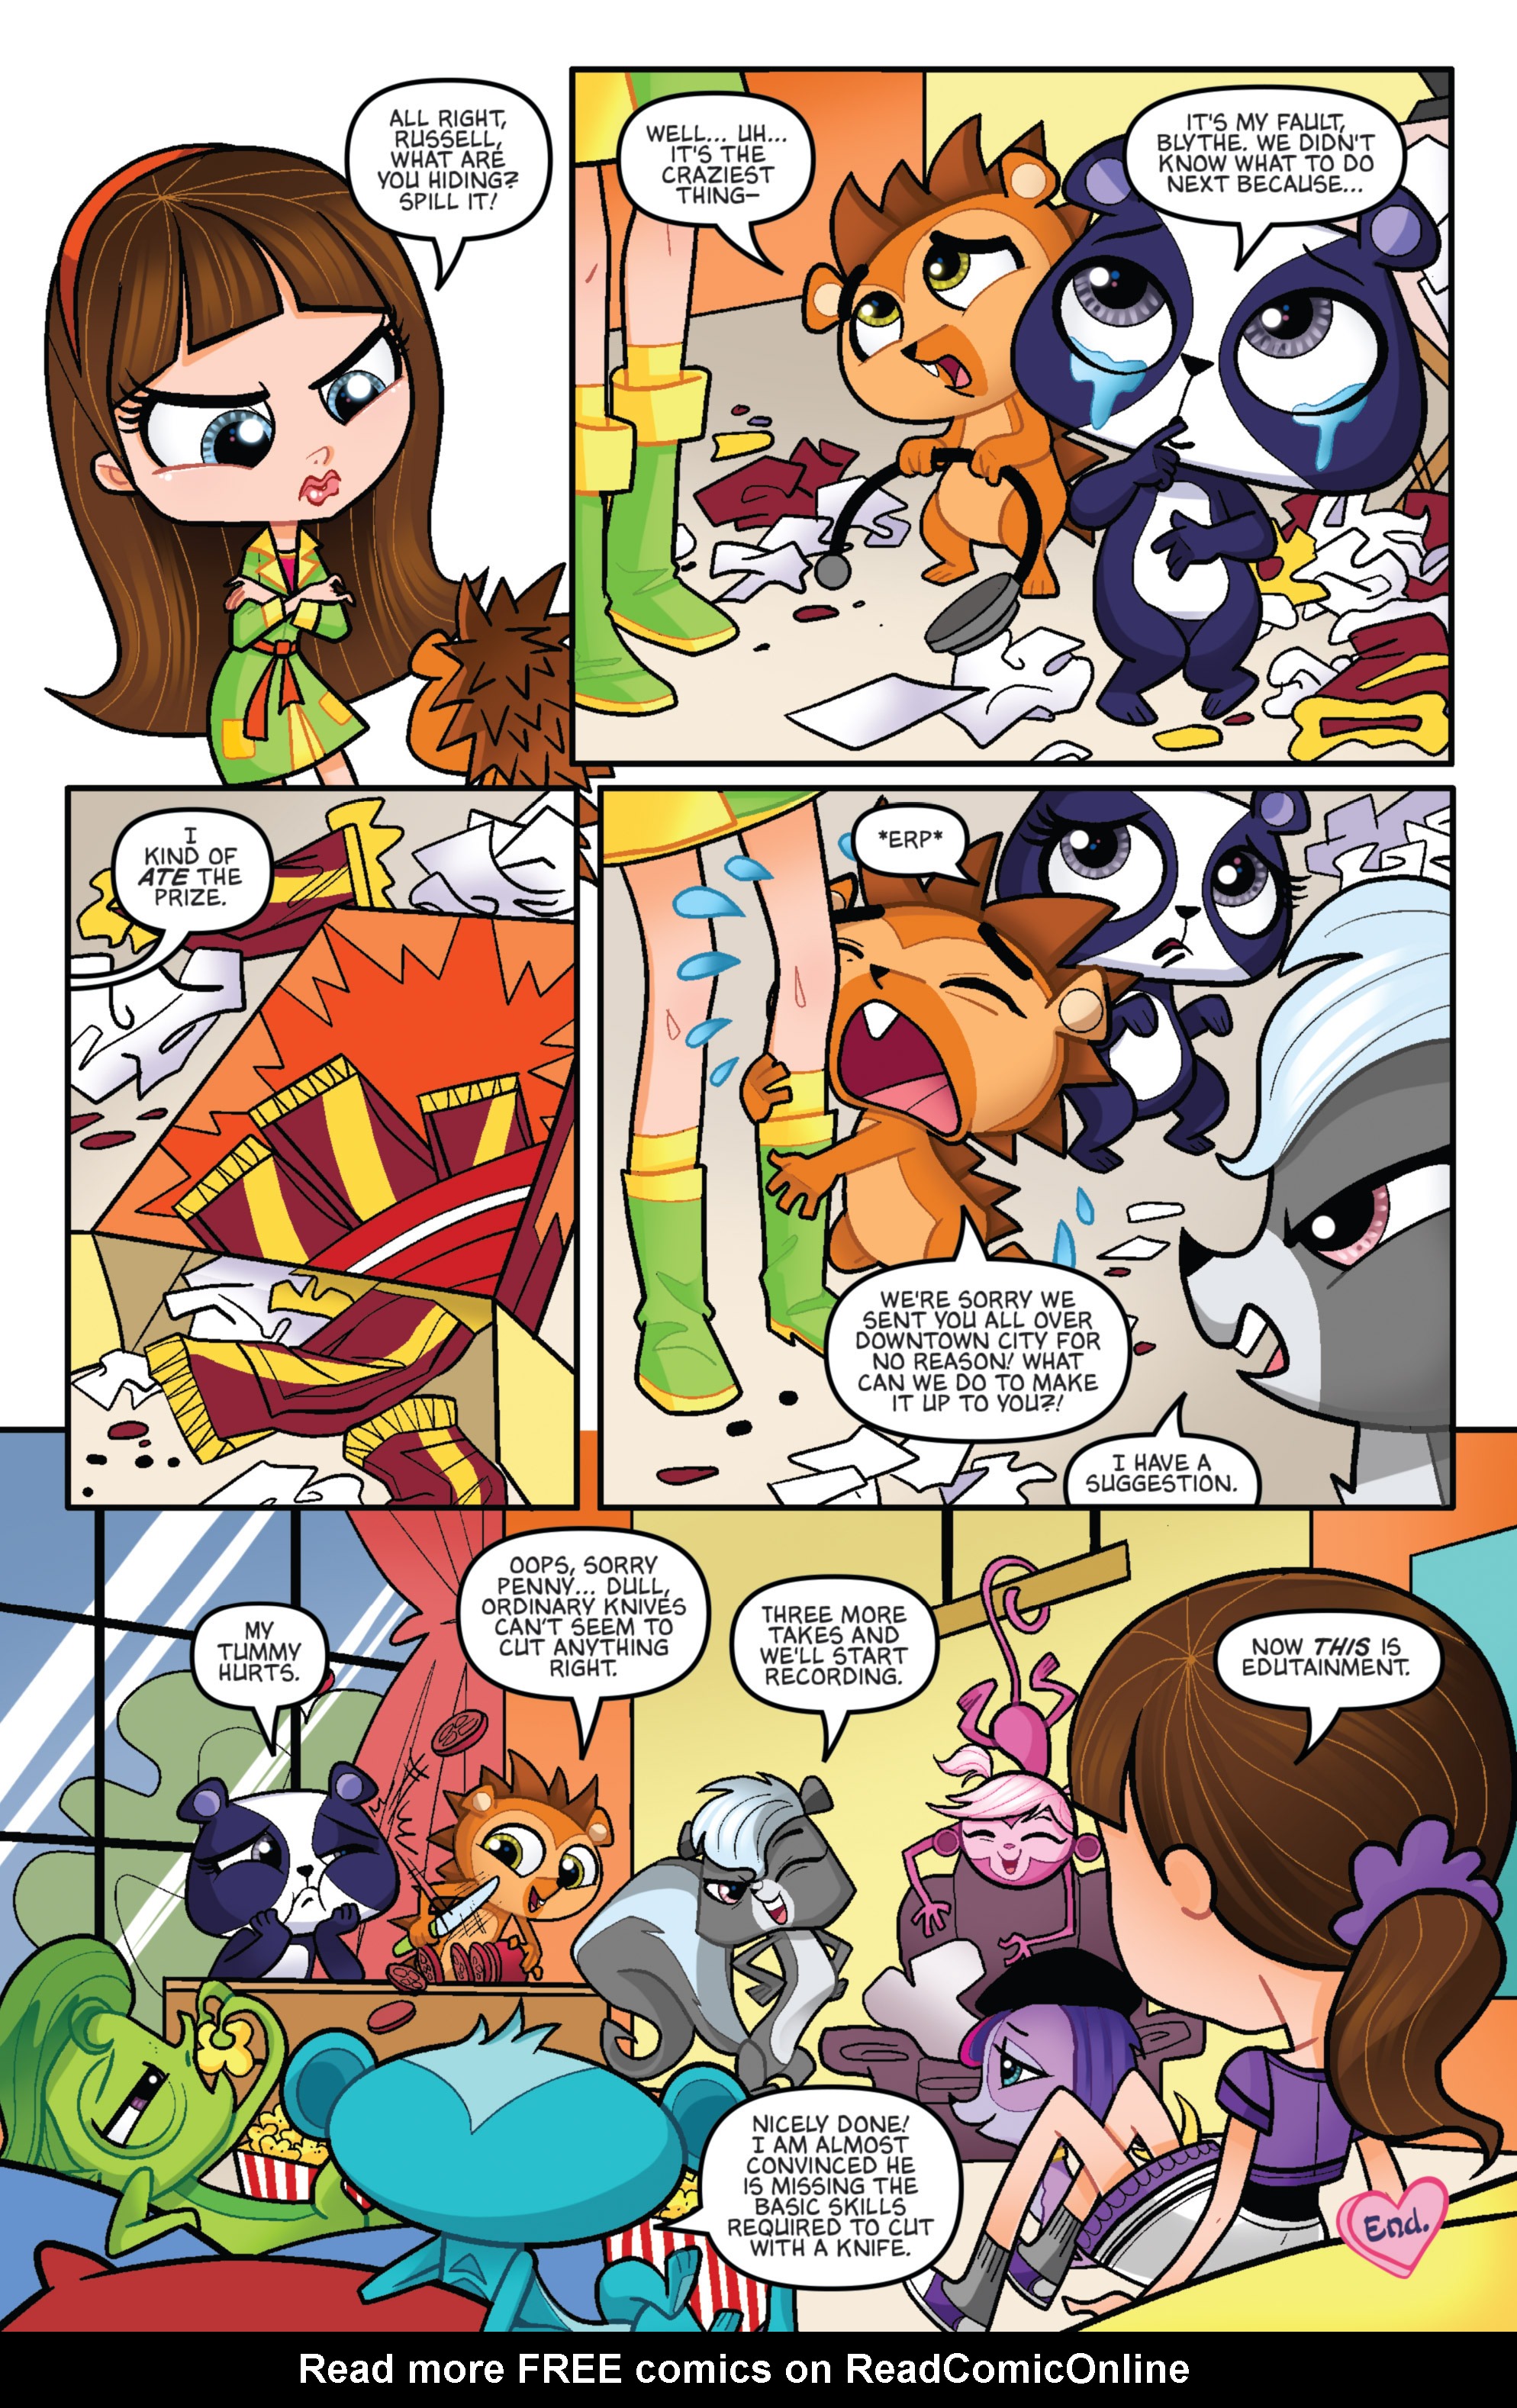 Littlest Pet Shop Issue 1 | Read Littlest Pet Shop Issue 1 comic online in  high quality. Read Full Comic online for free - Read comics online in high  quality .